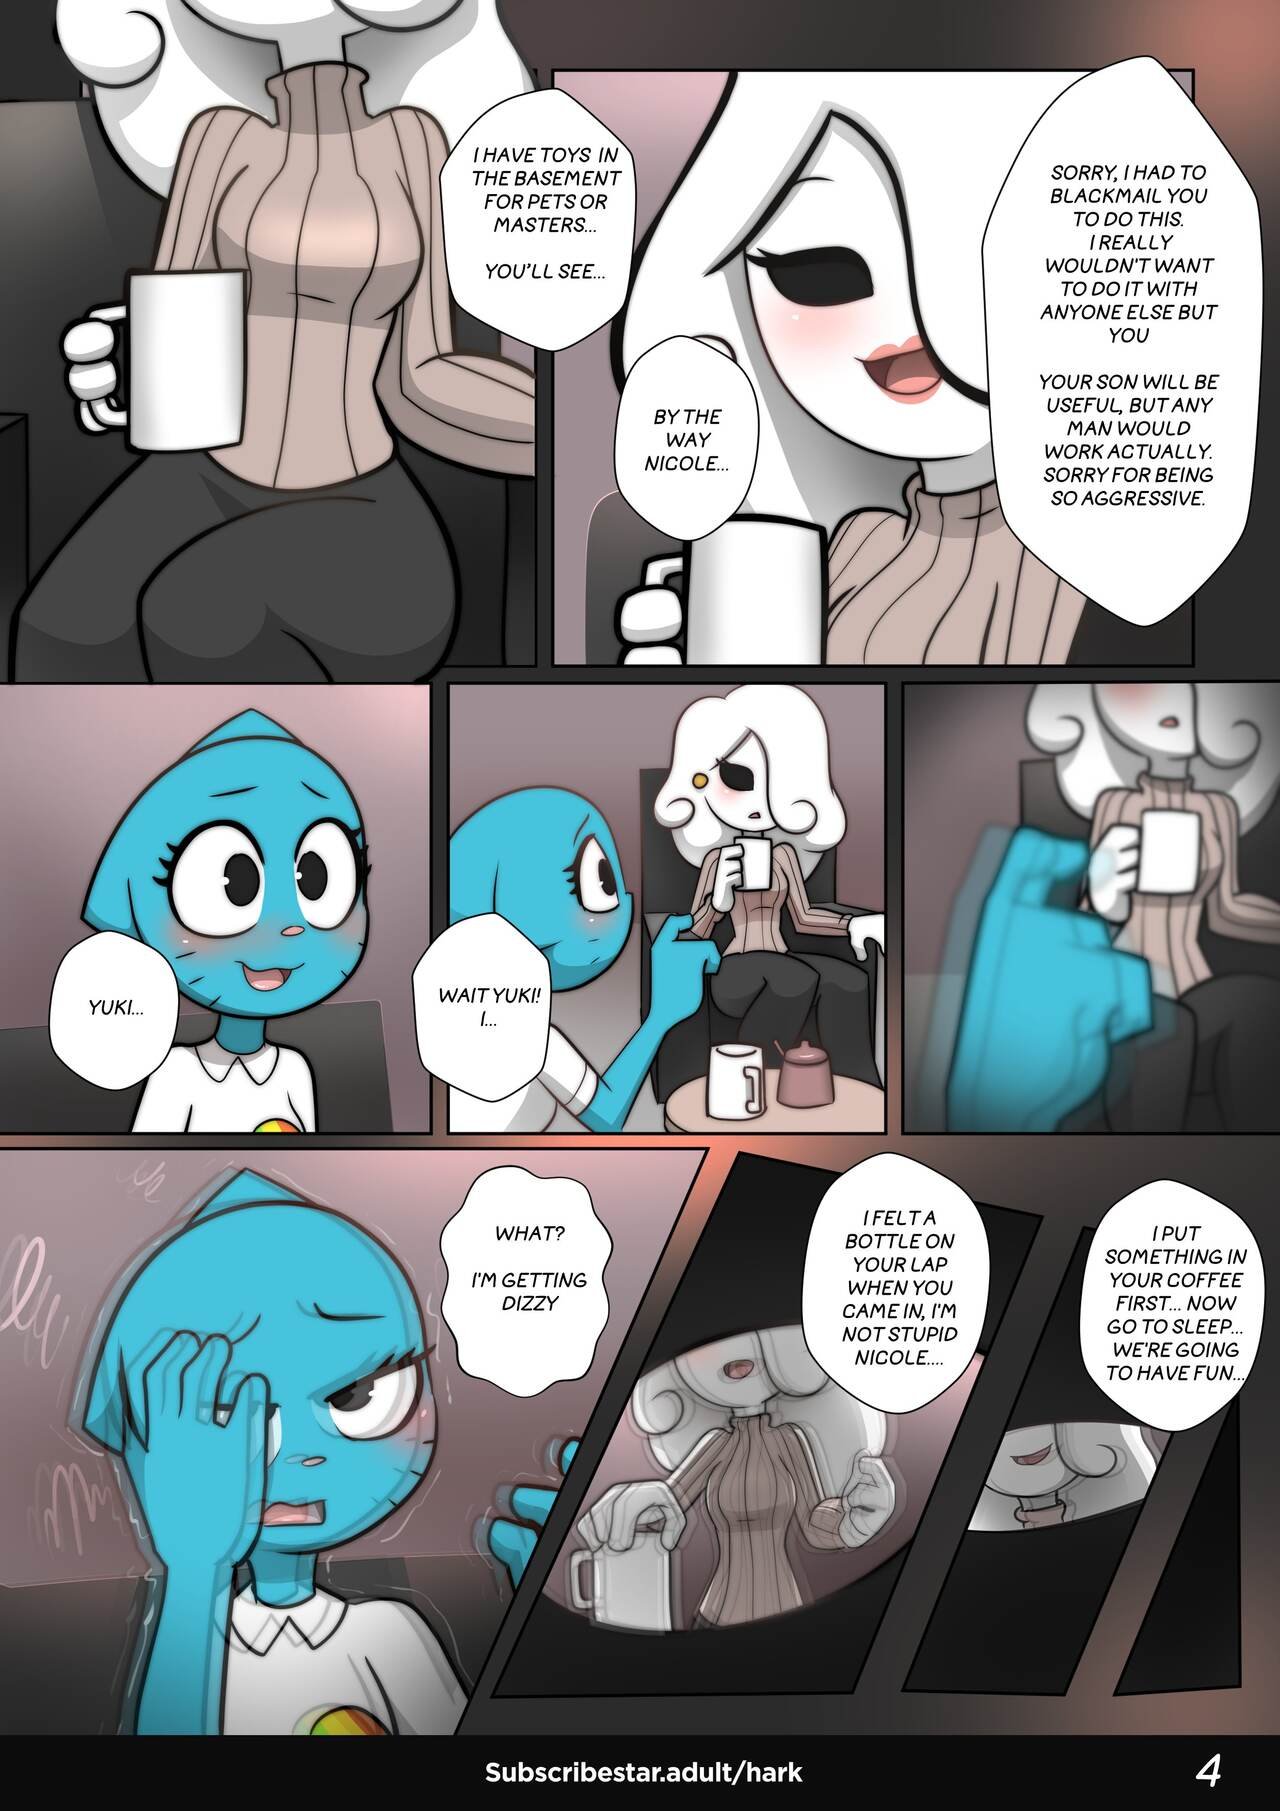 The Amazing Surprise 2 (The Amazing World of Gumball) - Ongoing comic porn  - HD Porn Comics